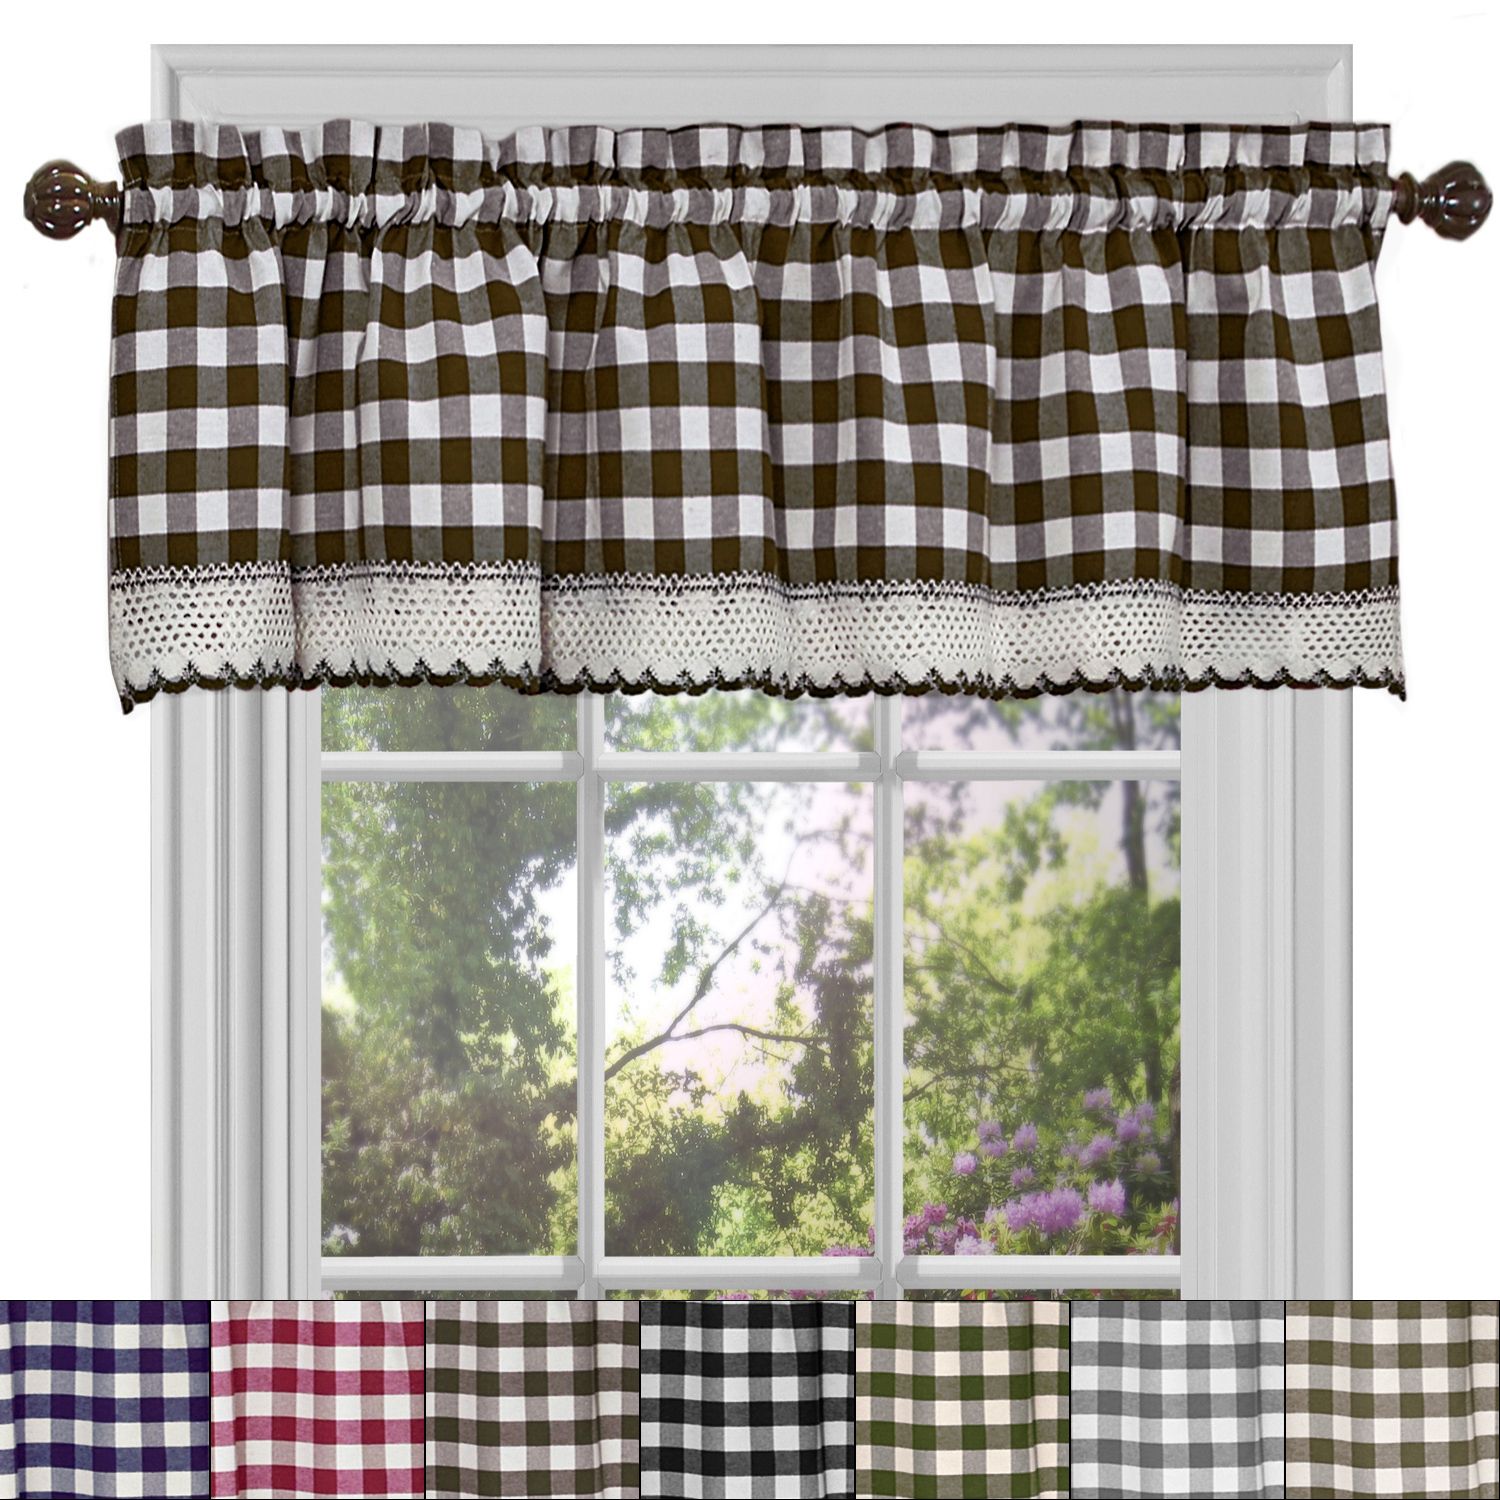 Details About Buffalo Check Gingham Kitchen Curtain Valance – 14" X 58" With Regard To Barnyard Buffalo Check Rooster Window Valances (View 5 of 20)